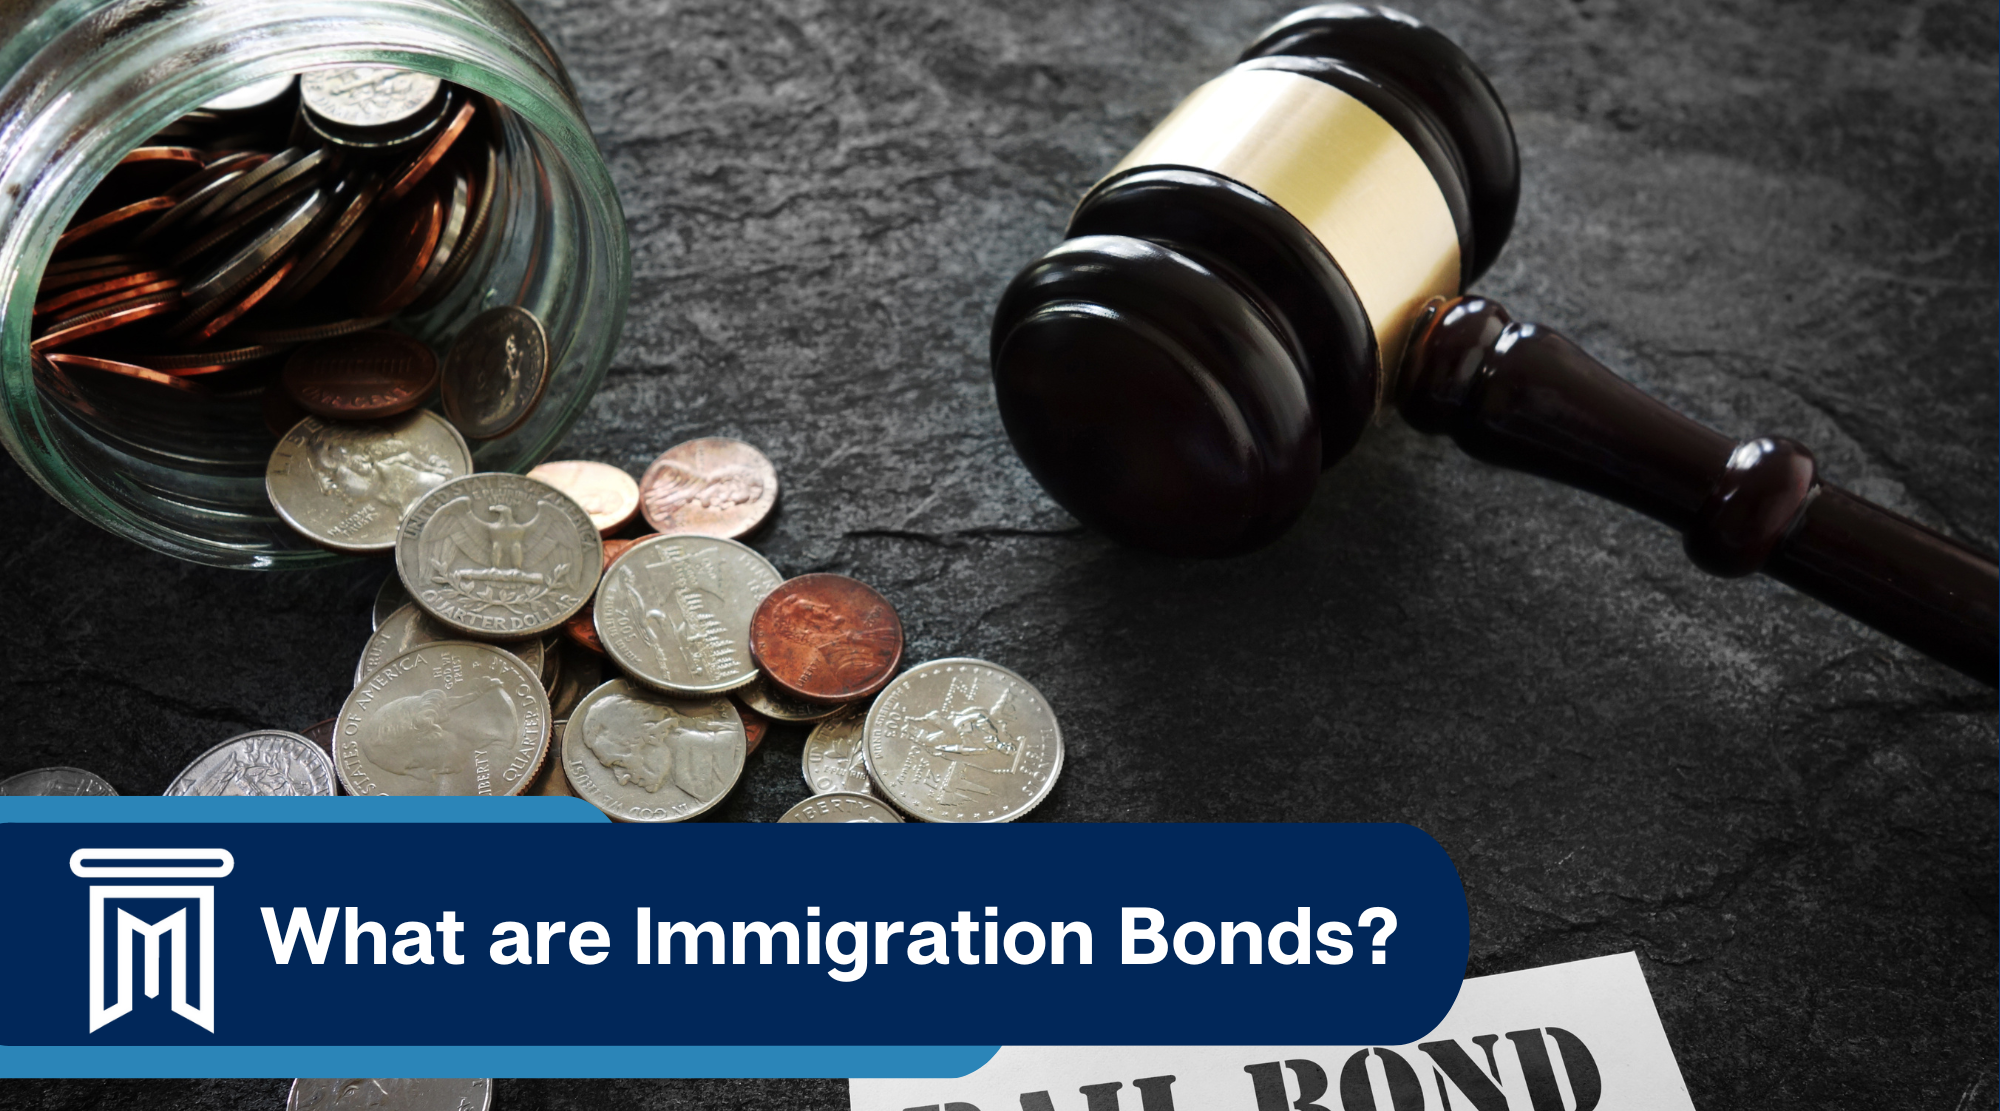 What are immigration bonds?